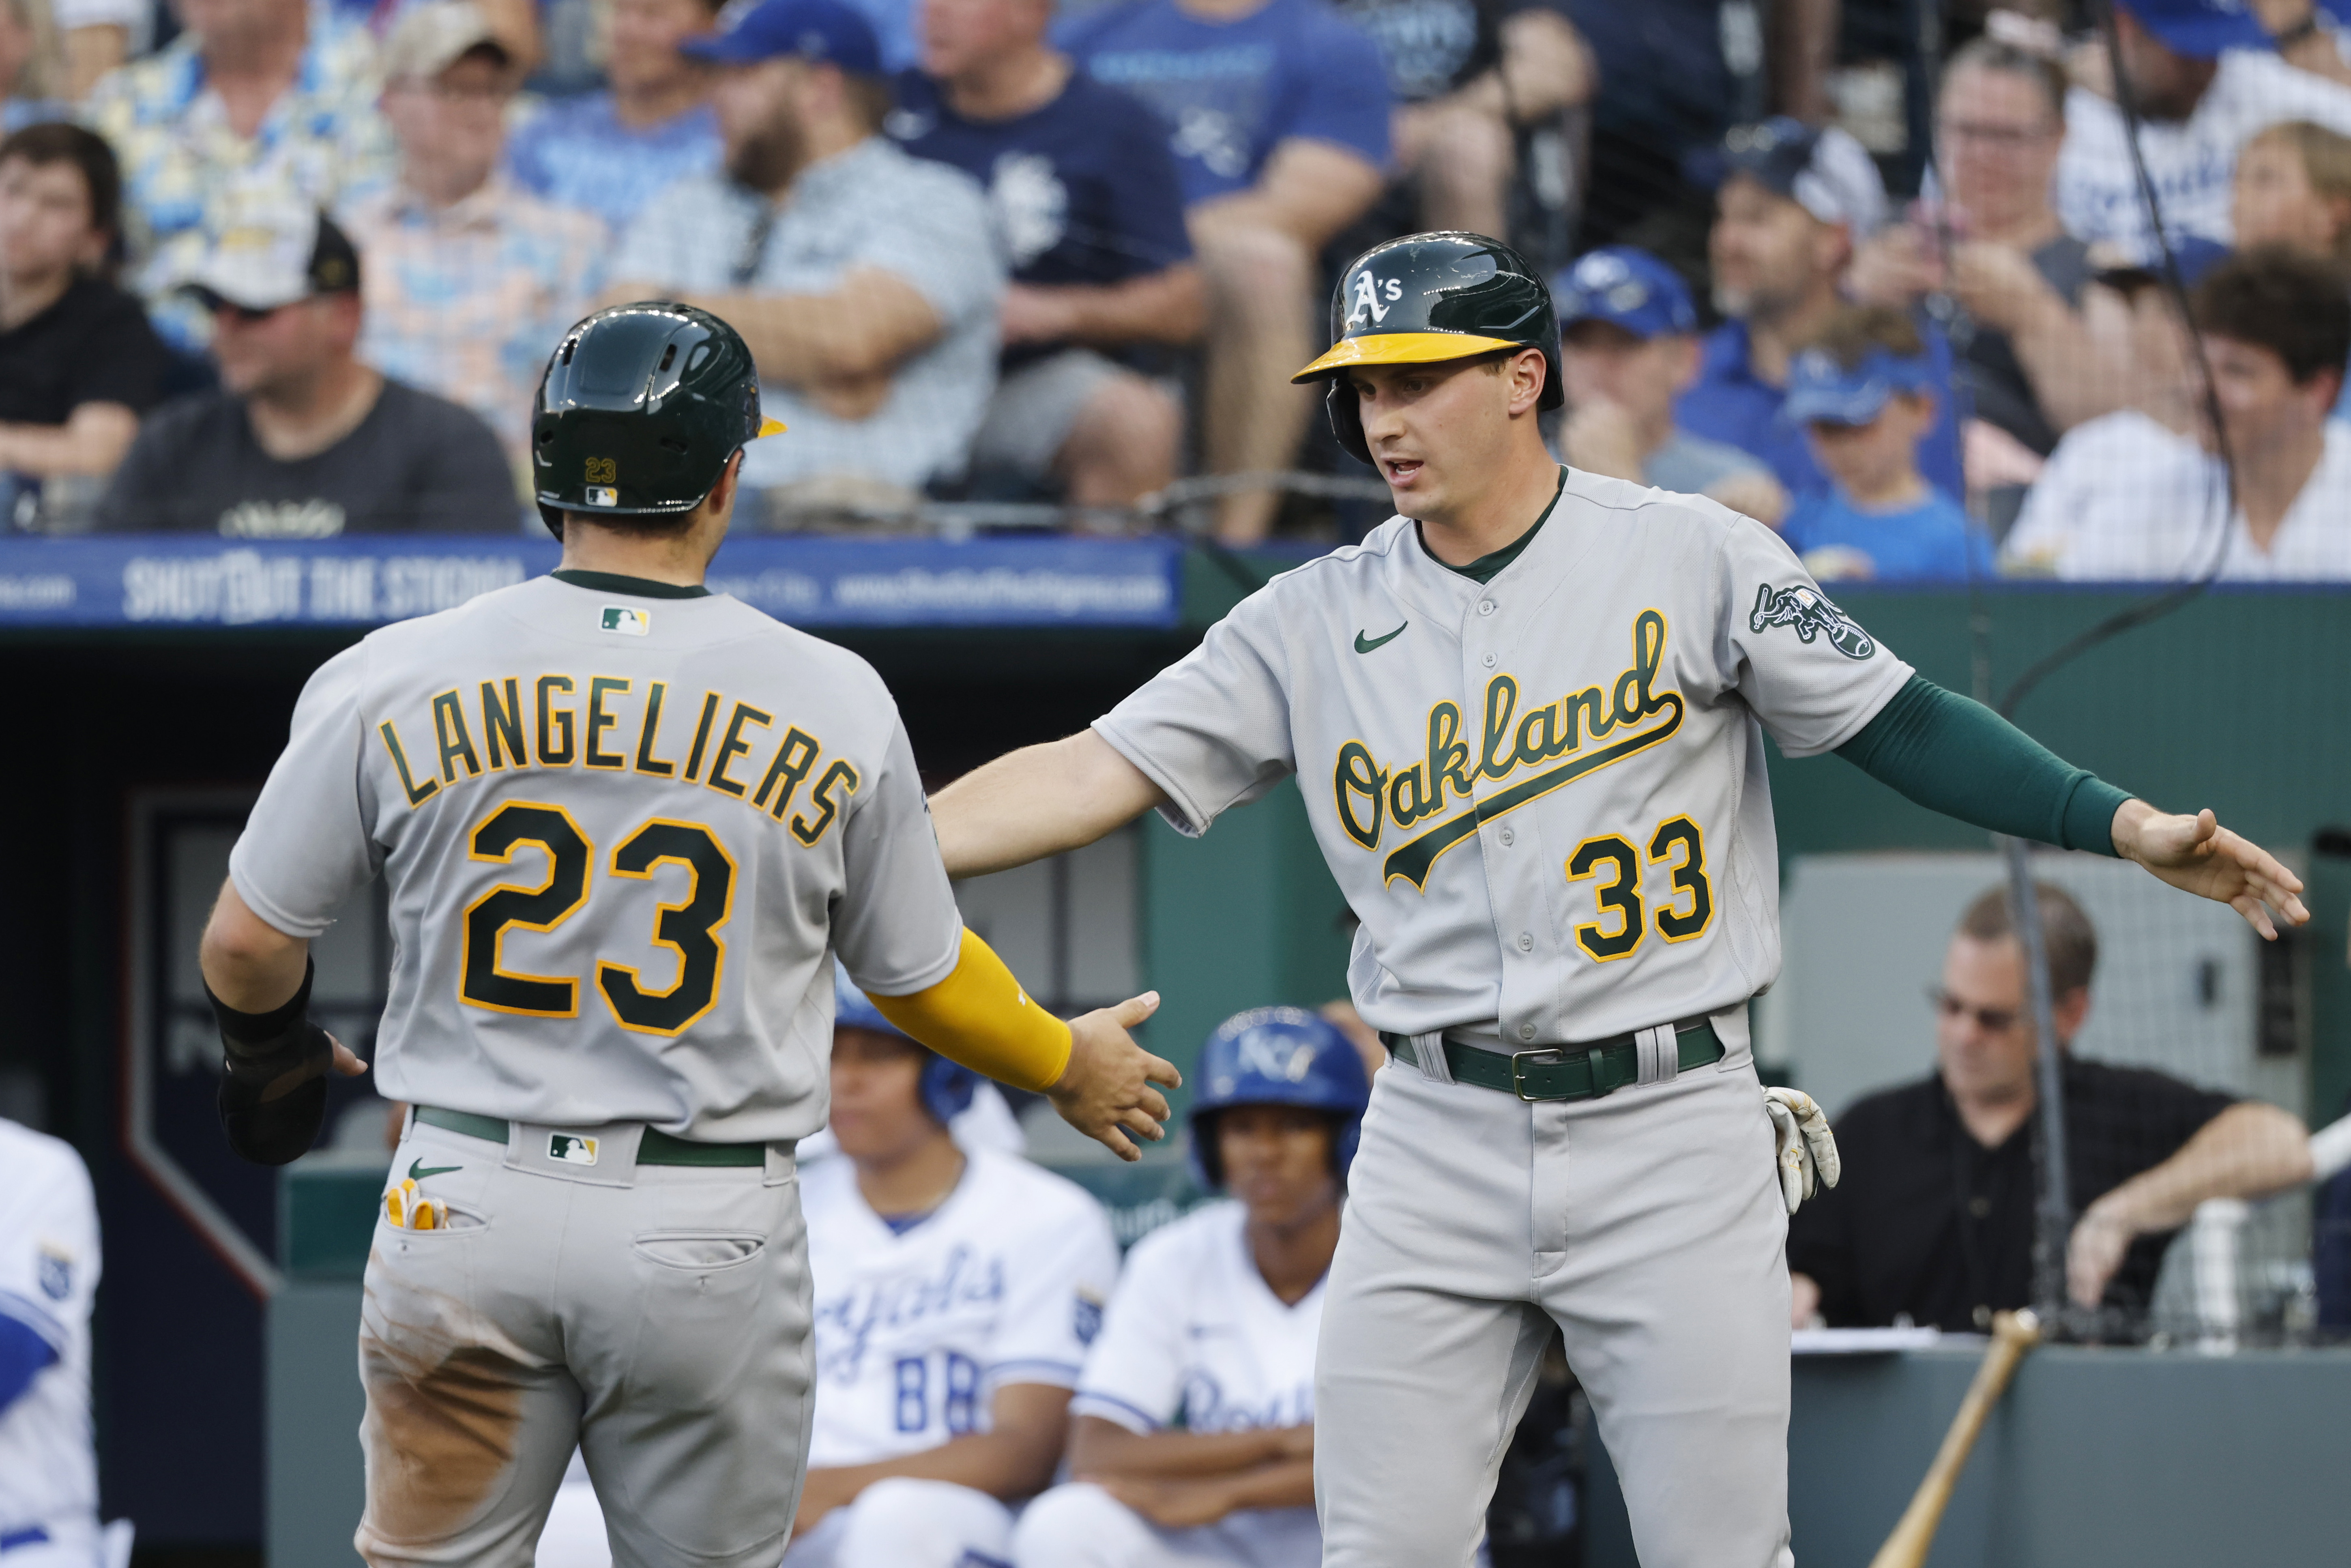 Best A's players by uniform number